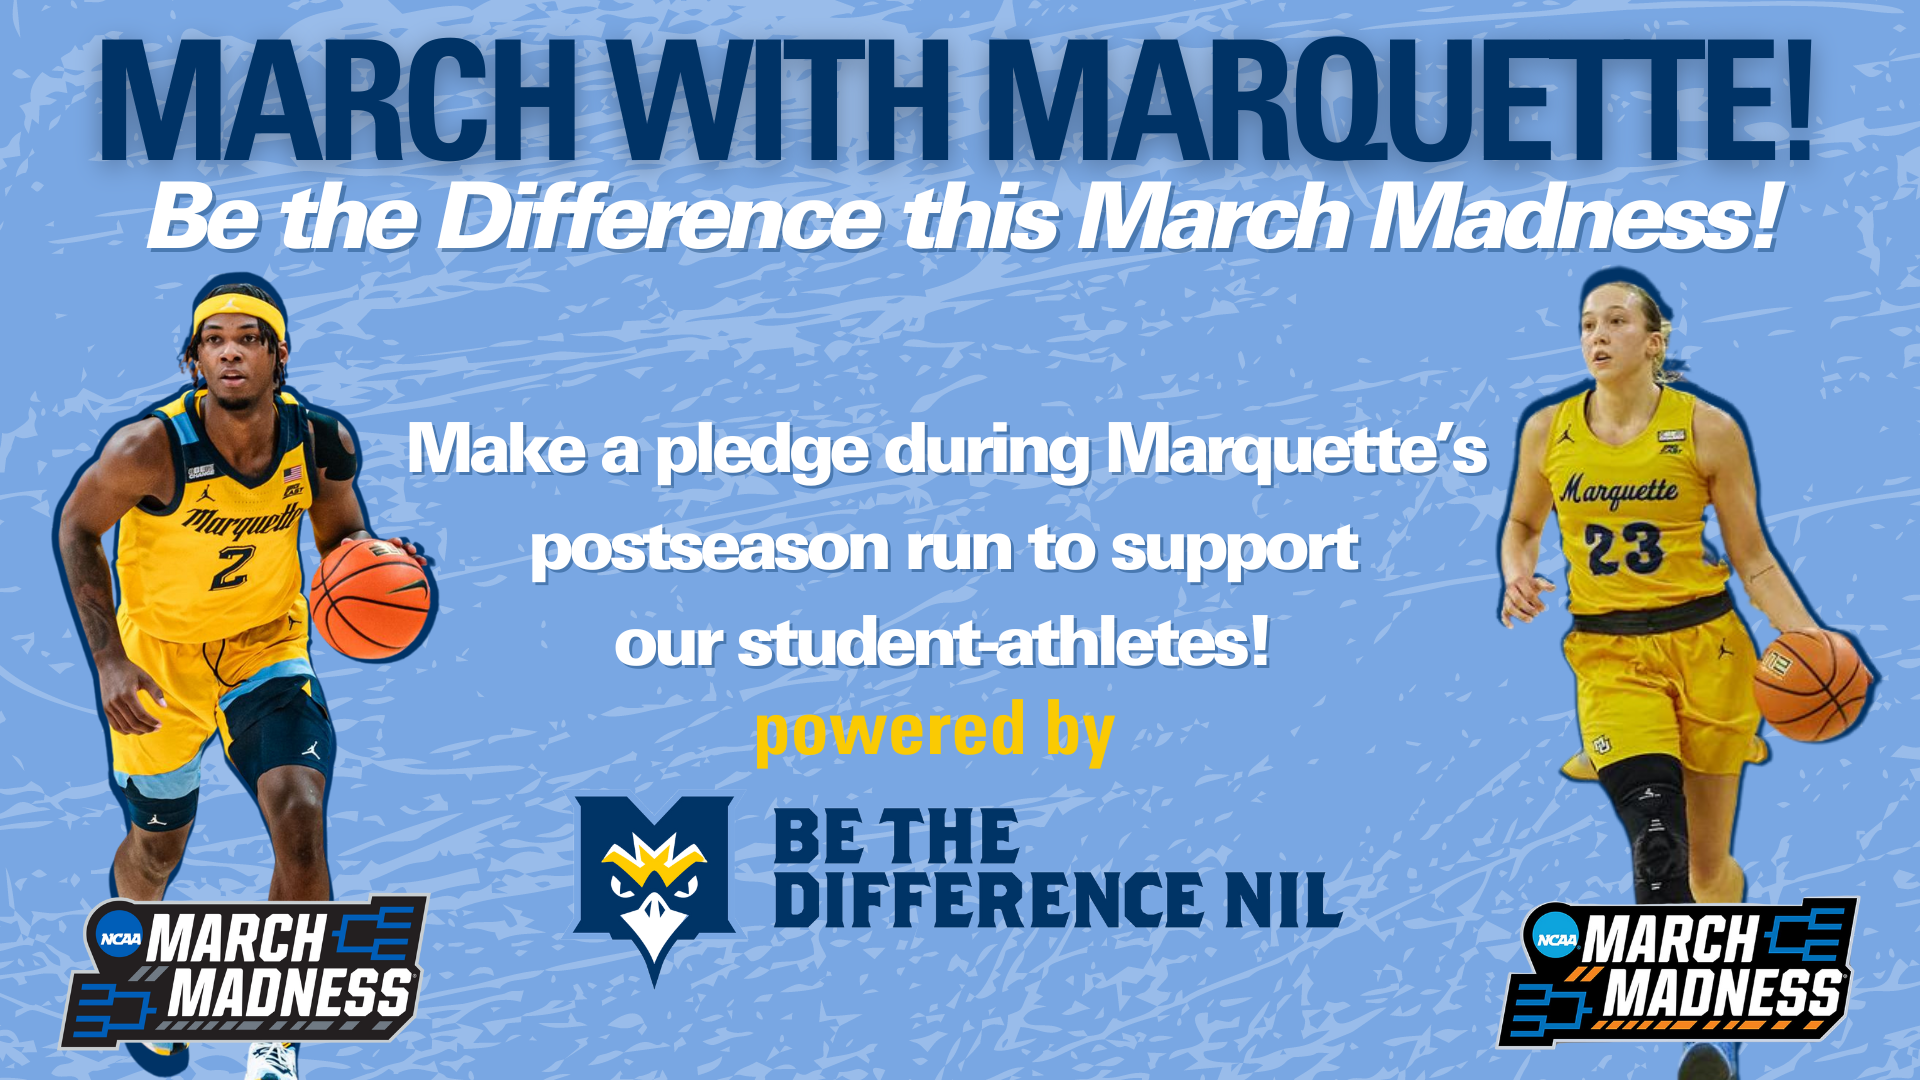 March with Marquette